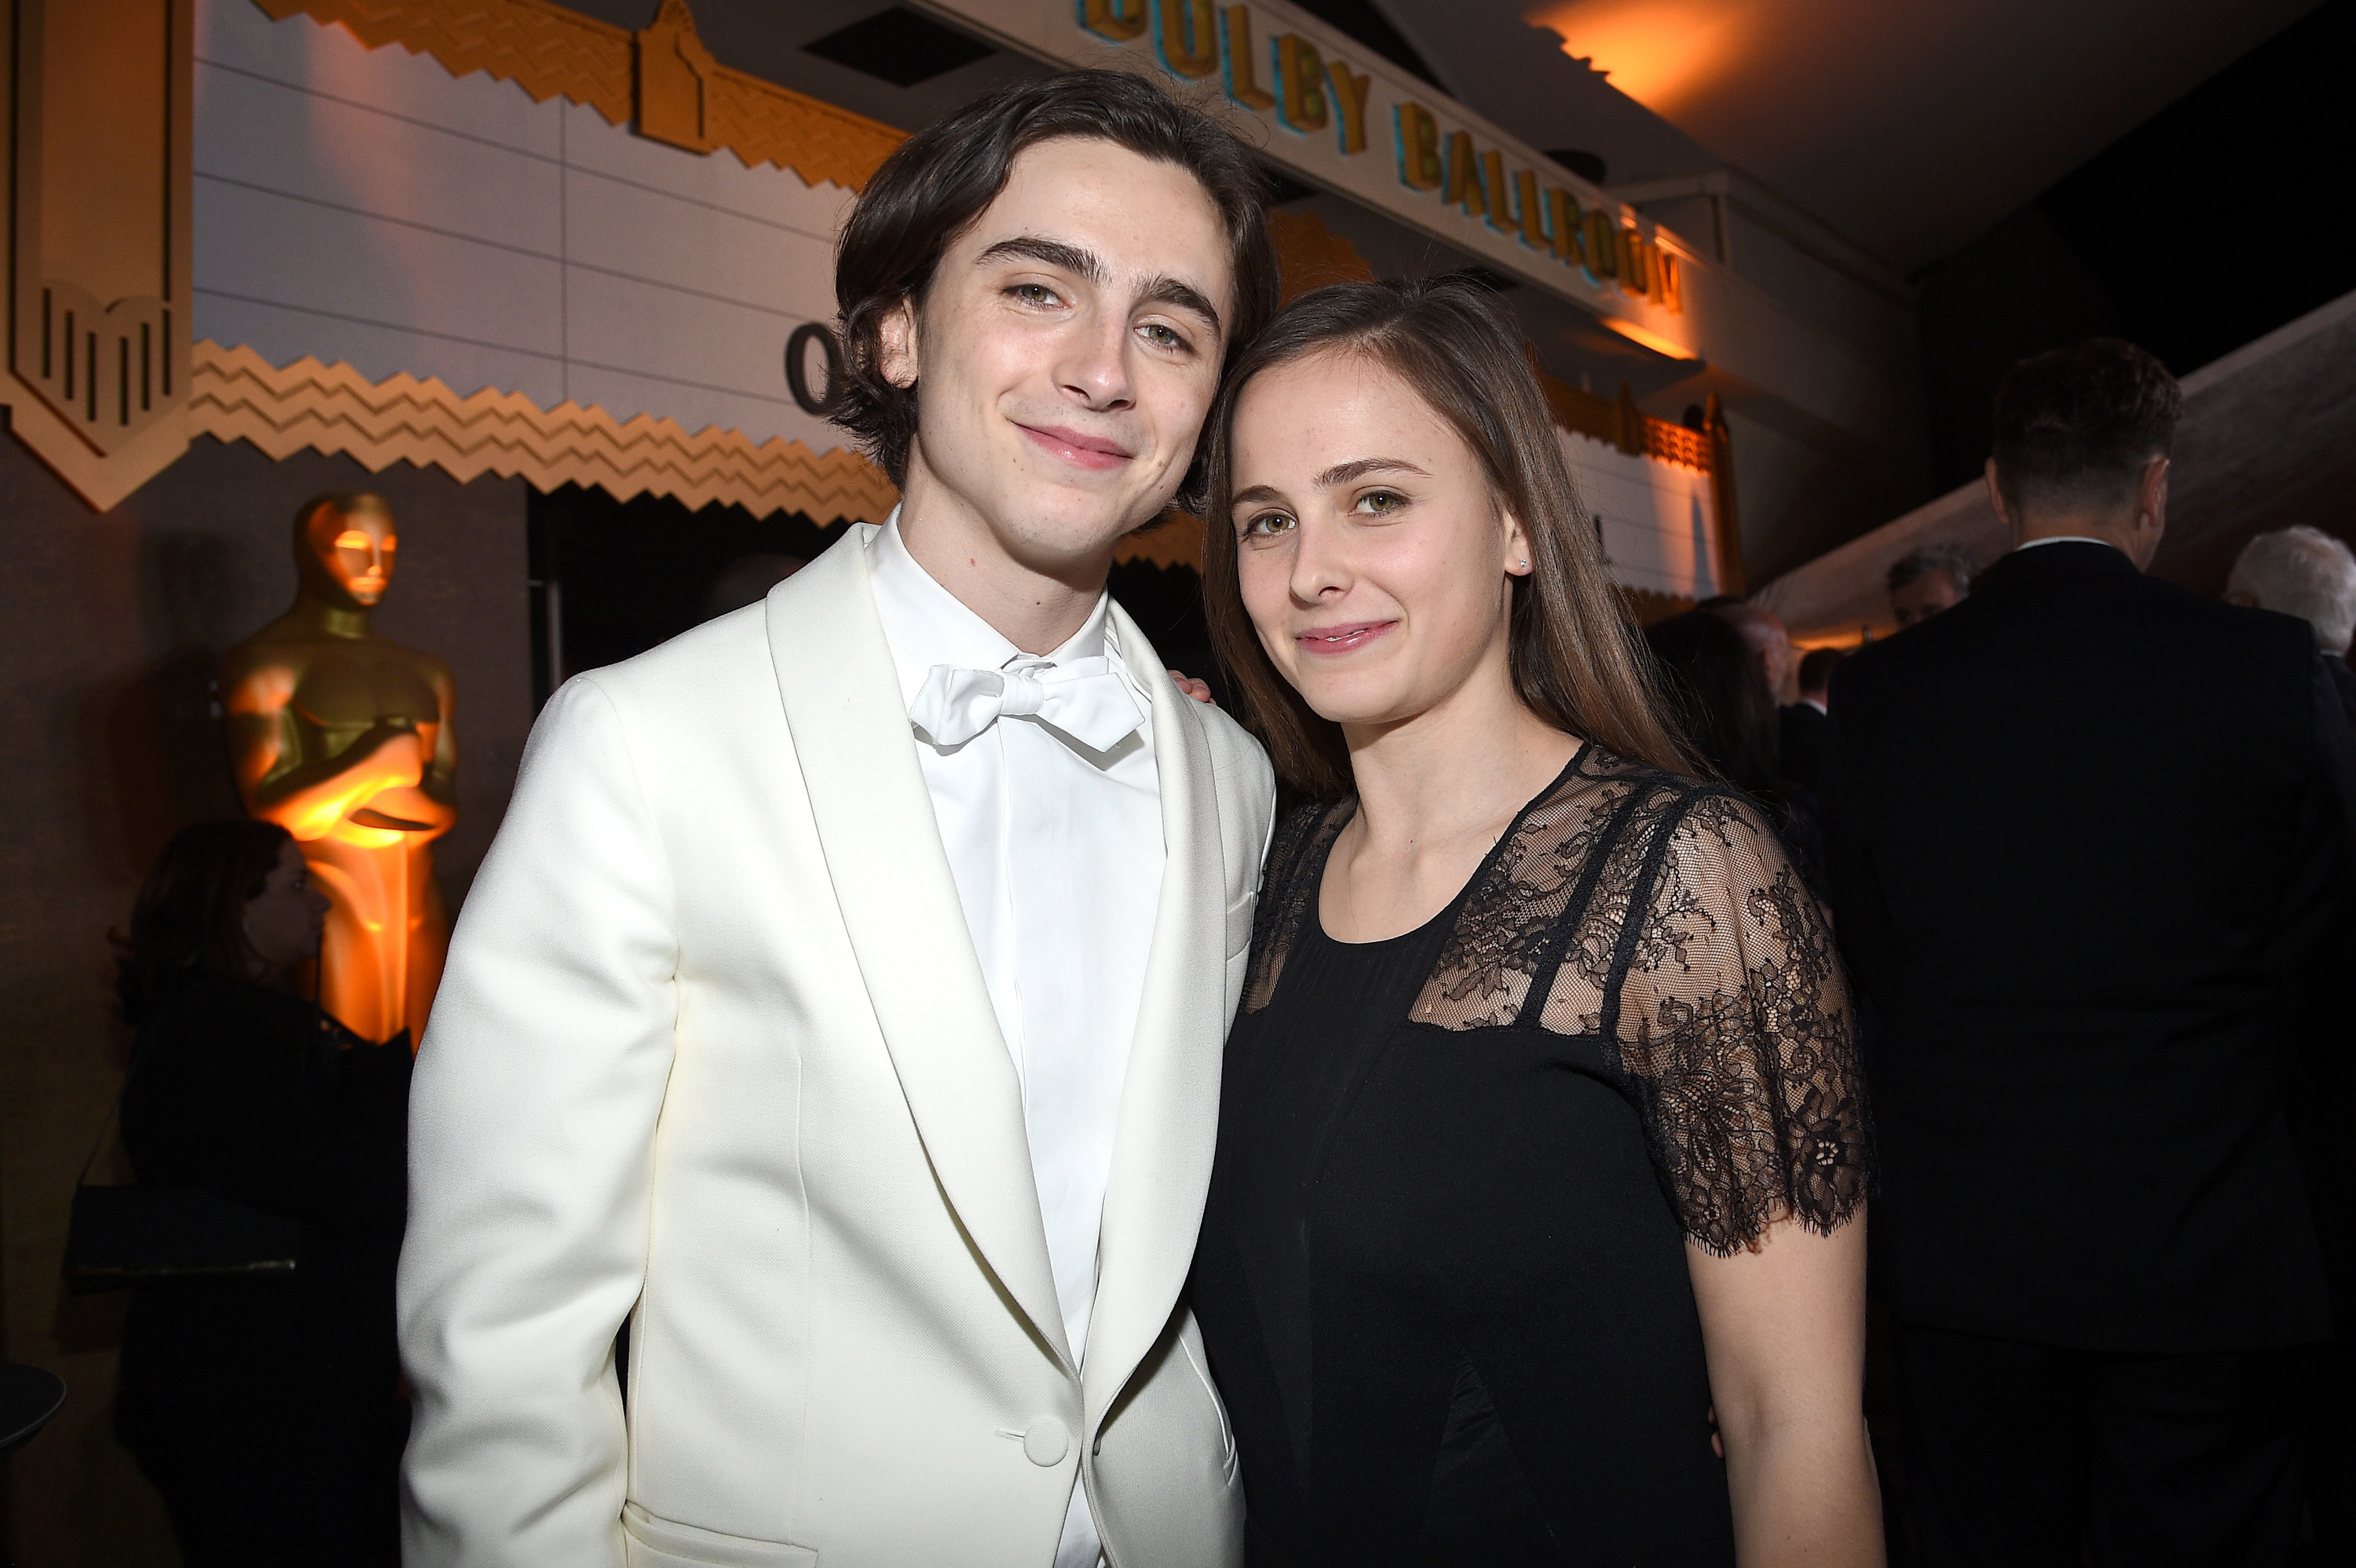 Timothée and Pauline pose for a photo together